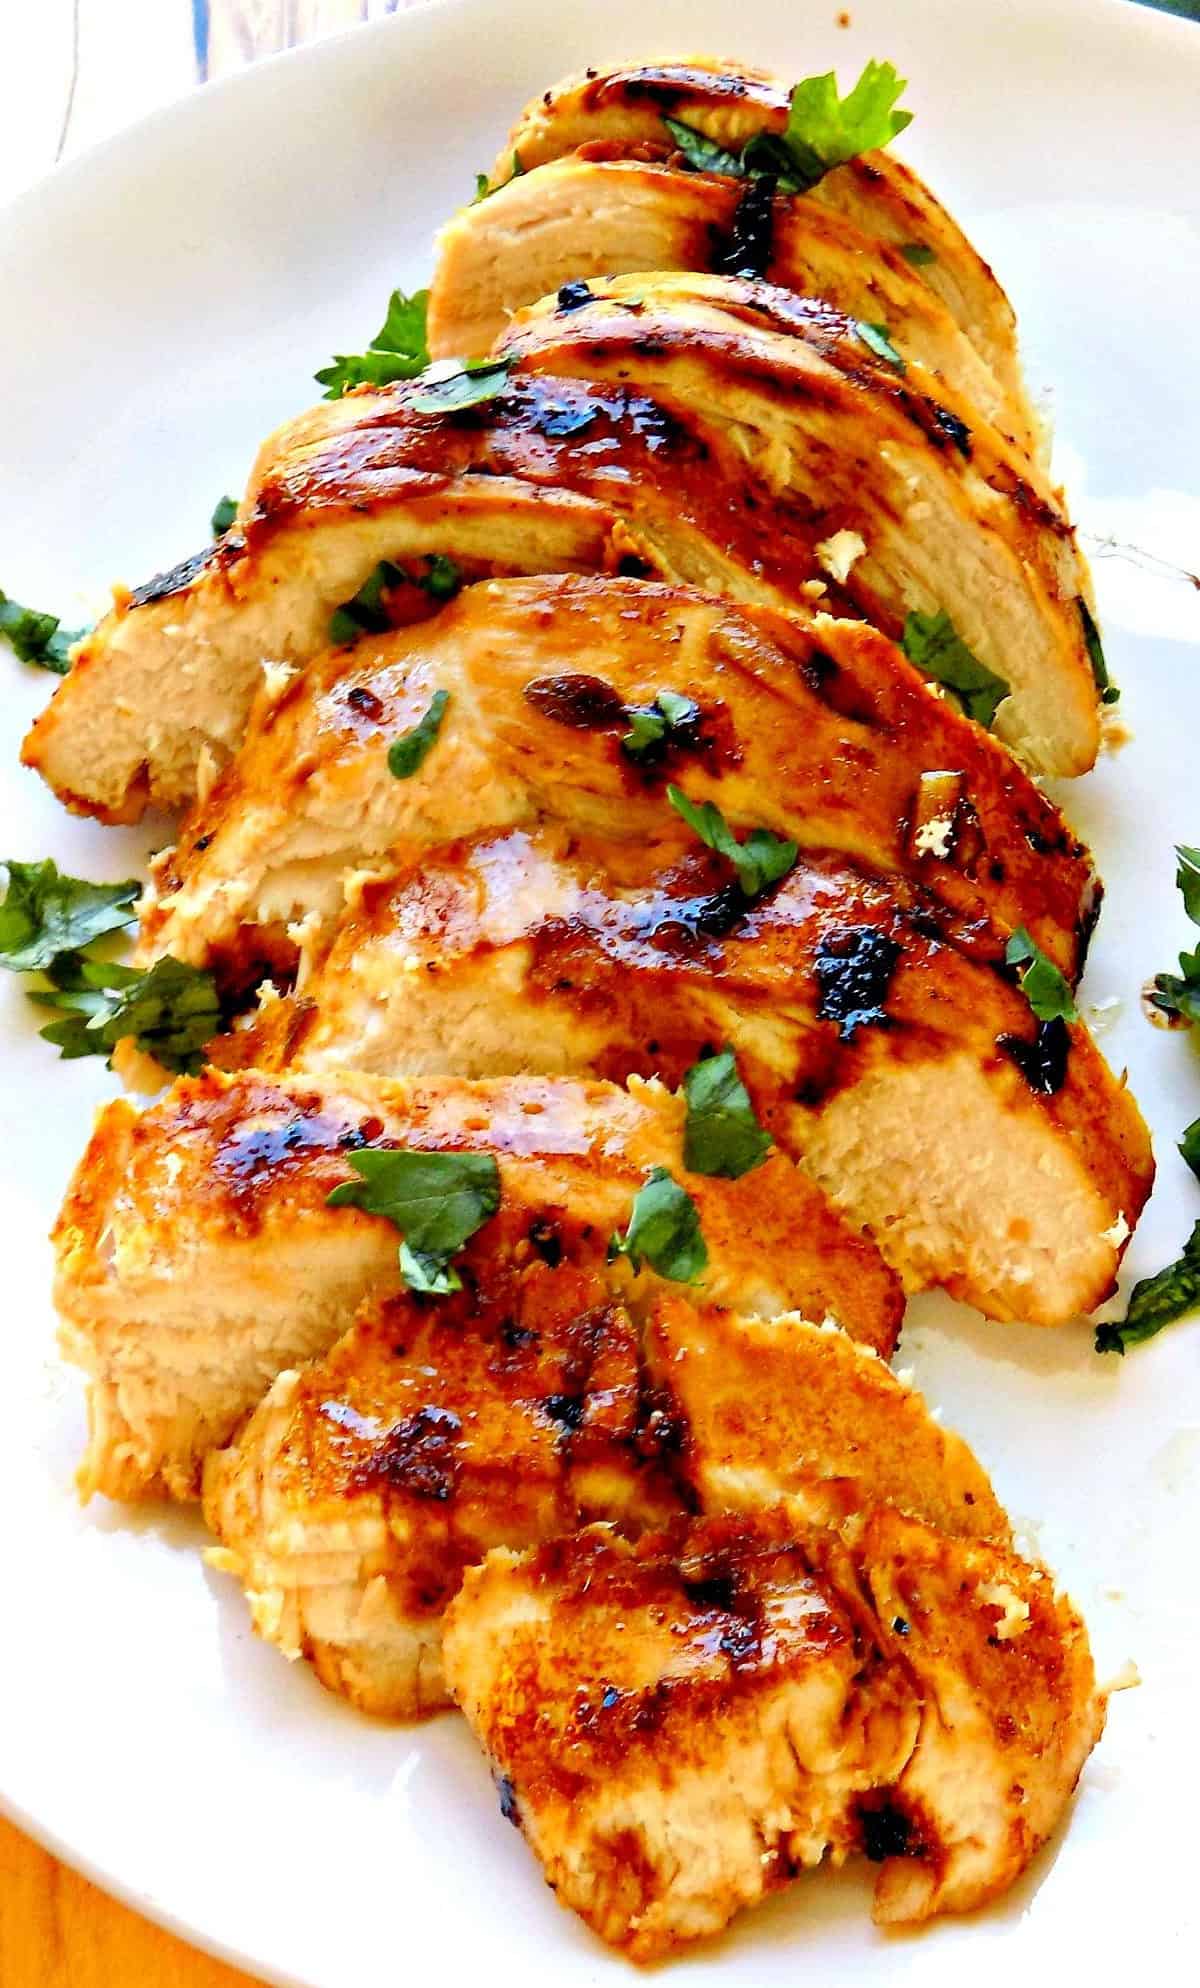  Juicy and flavorful Key West Chicken, perfect for summer grilling!